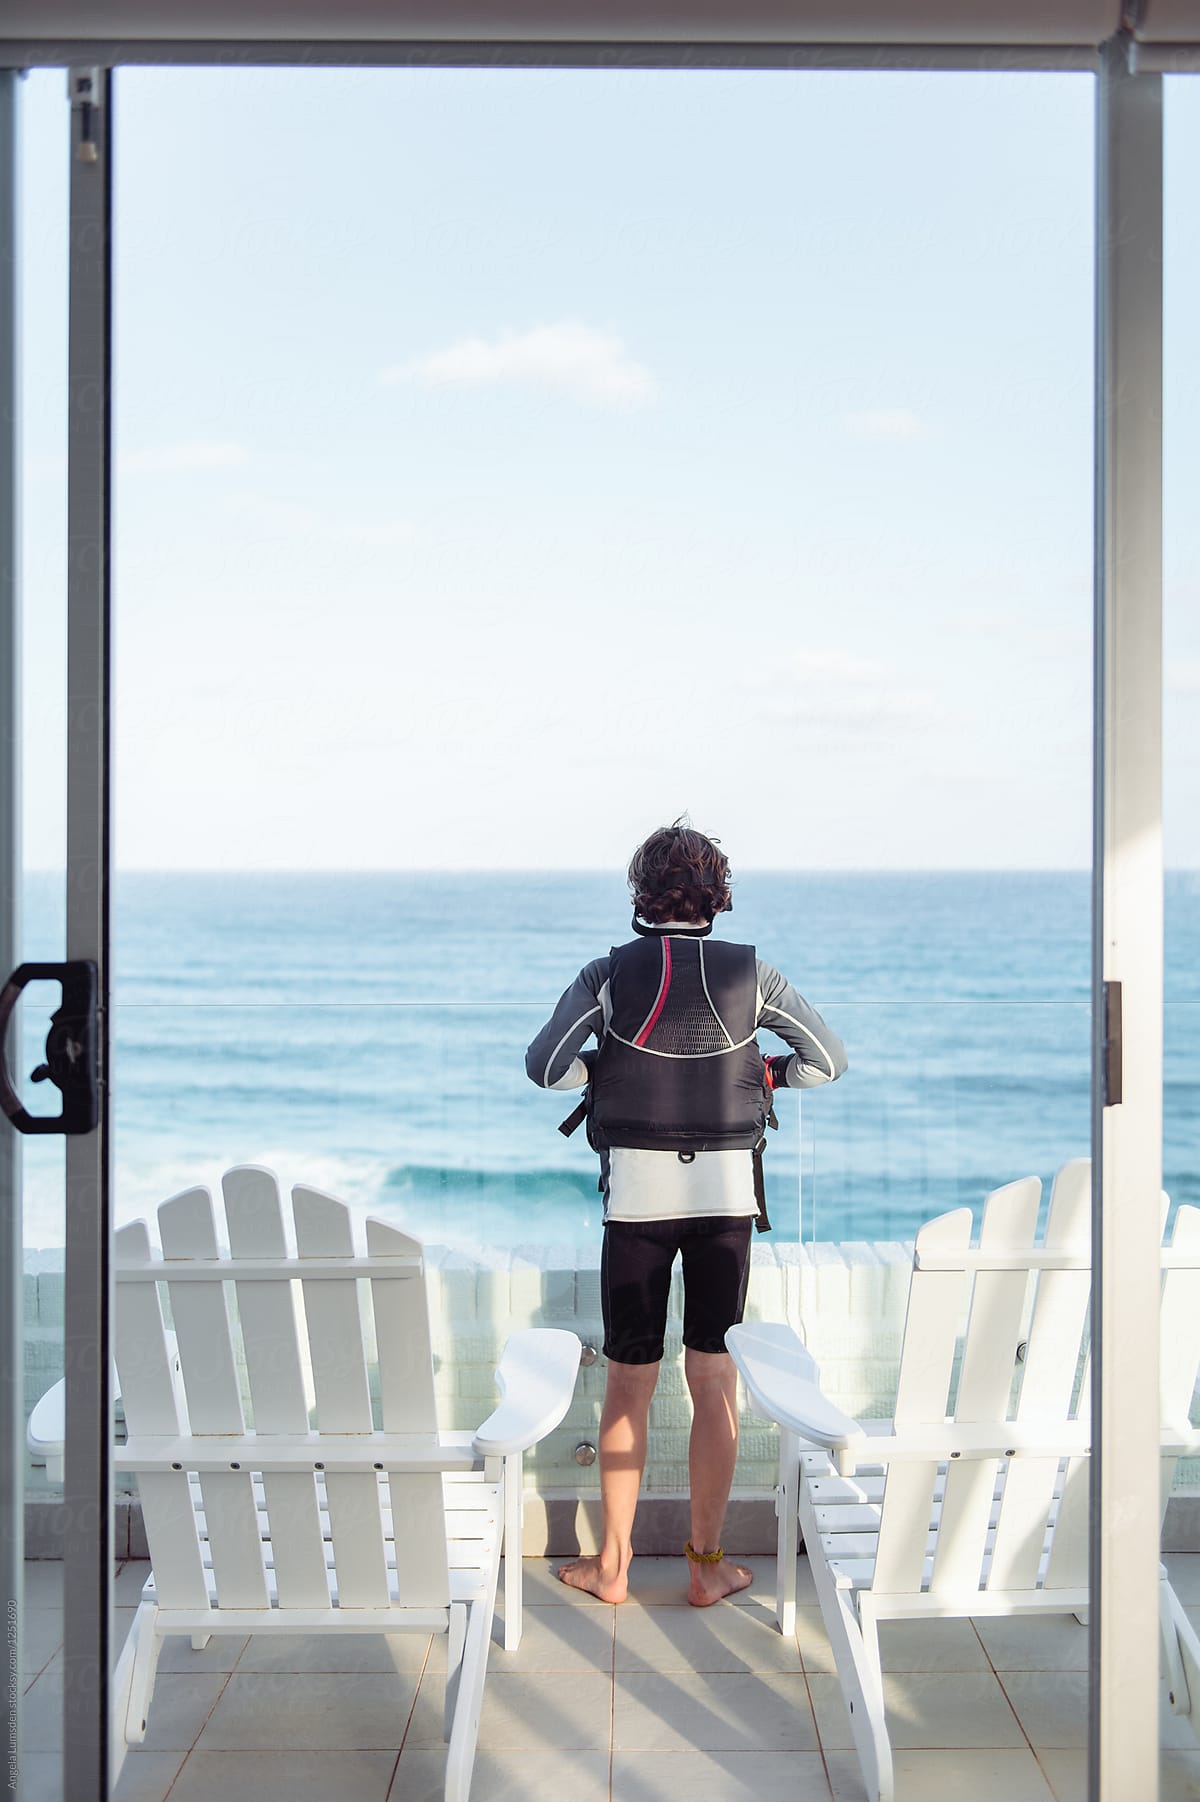 Child in sailing gear looks out at the ocean conditions